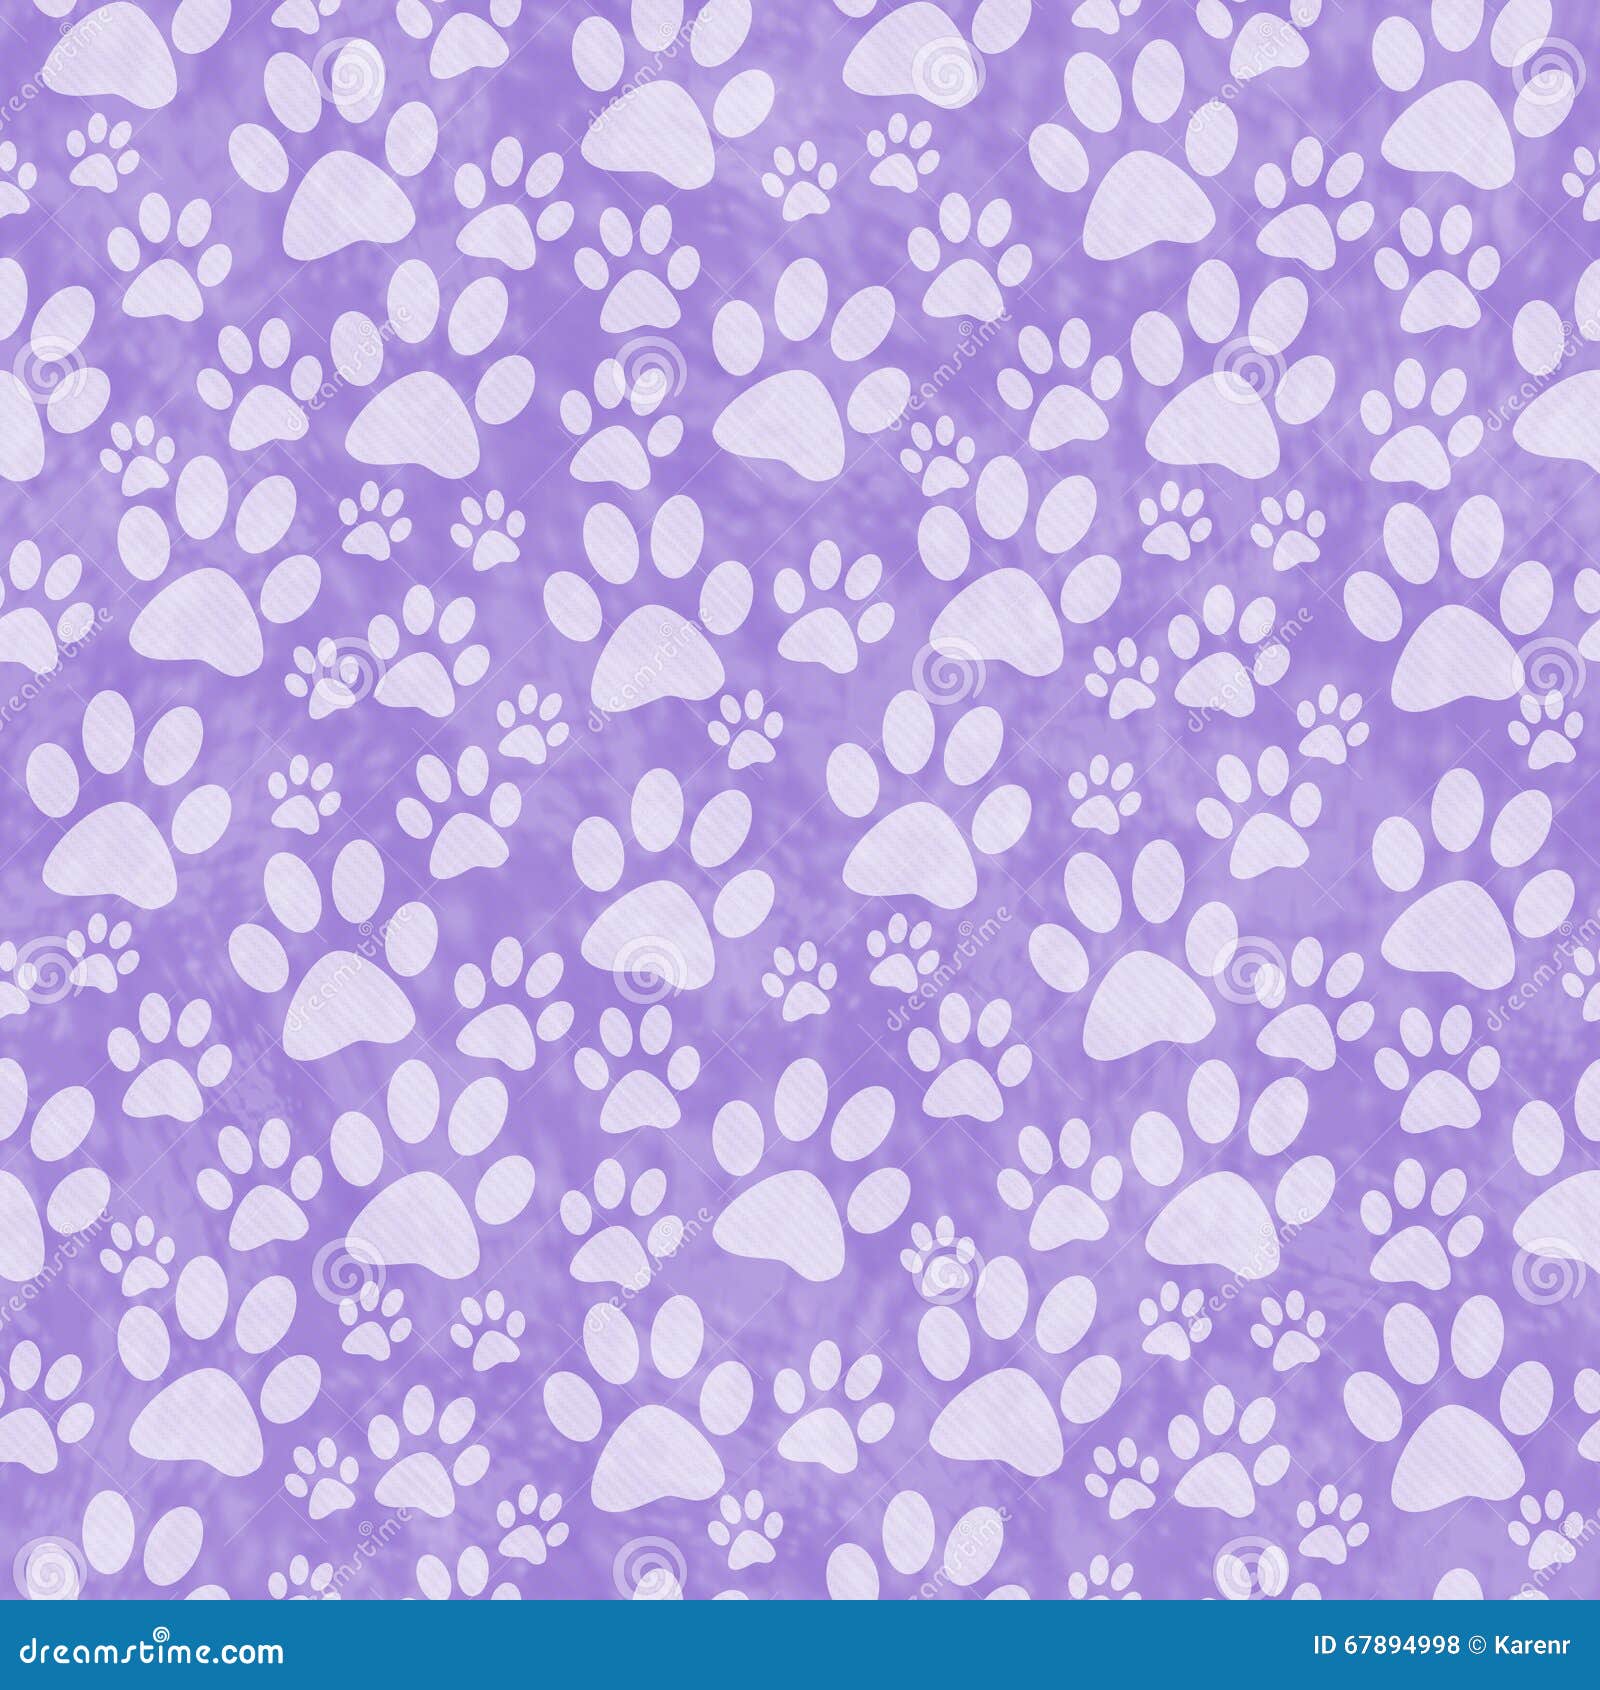 purple doggy paw print tile pattern repeat background